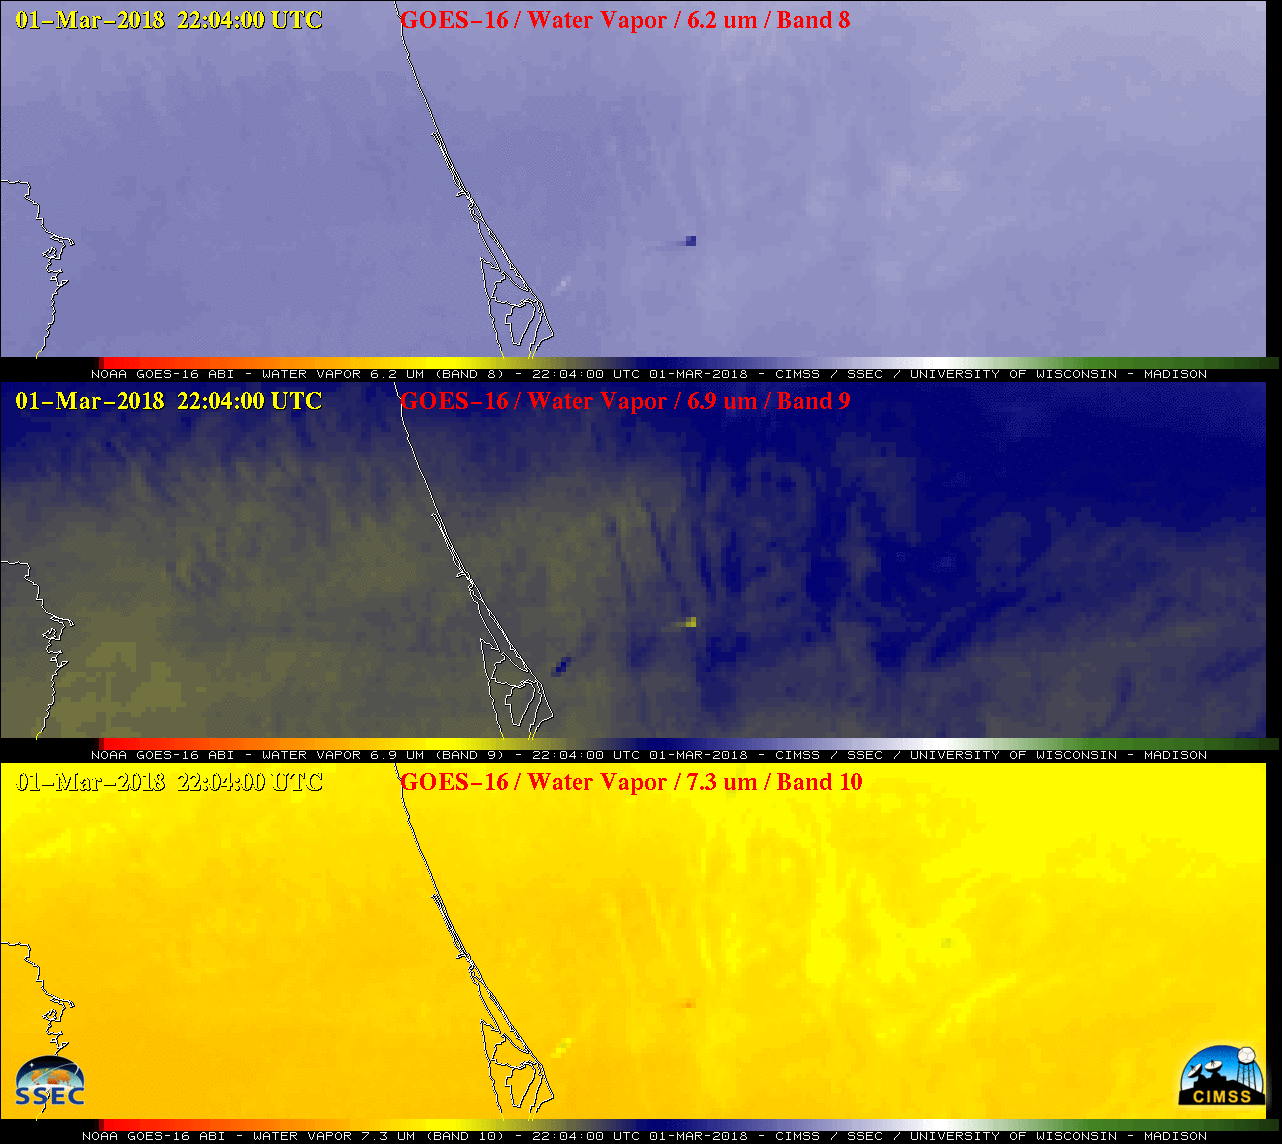 GOES-16 Upper-level (6.2 µm, top), Mid-level (6.9 µm, middle) and Low-level (7.3 µm, bottom) images [click to play animation]